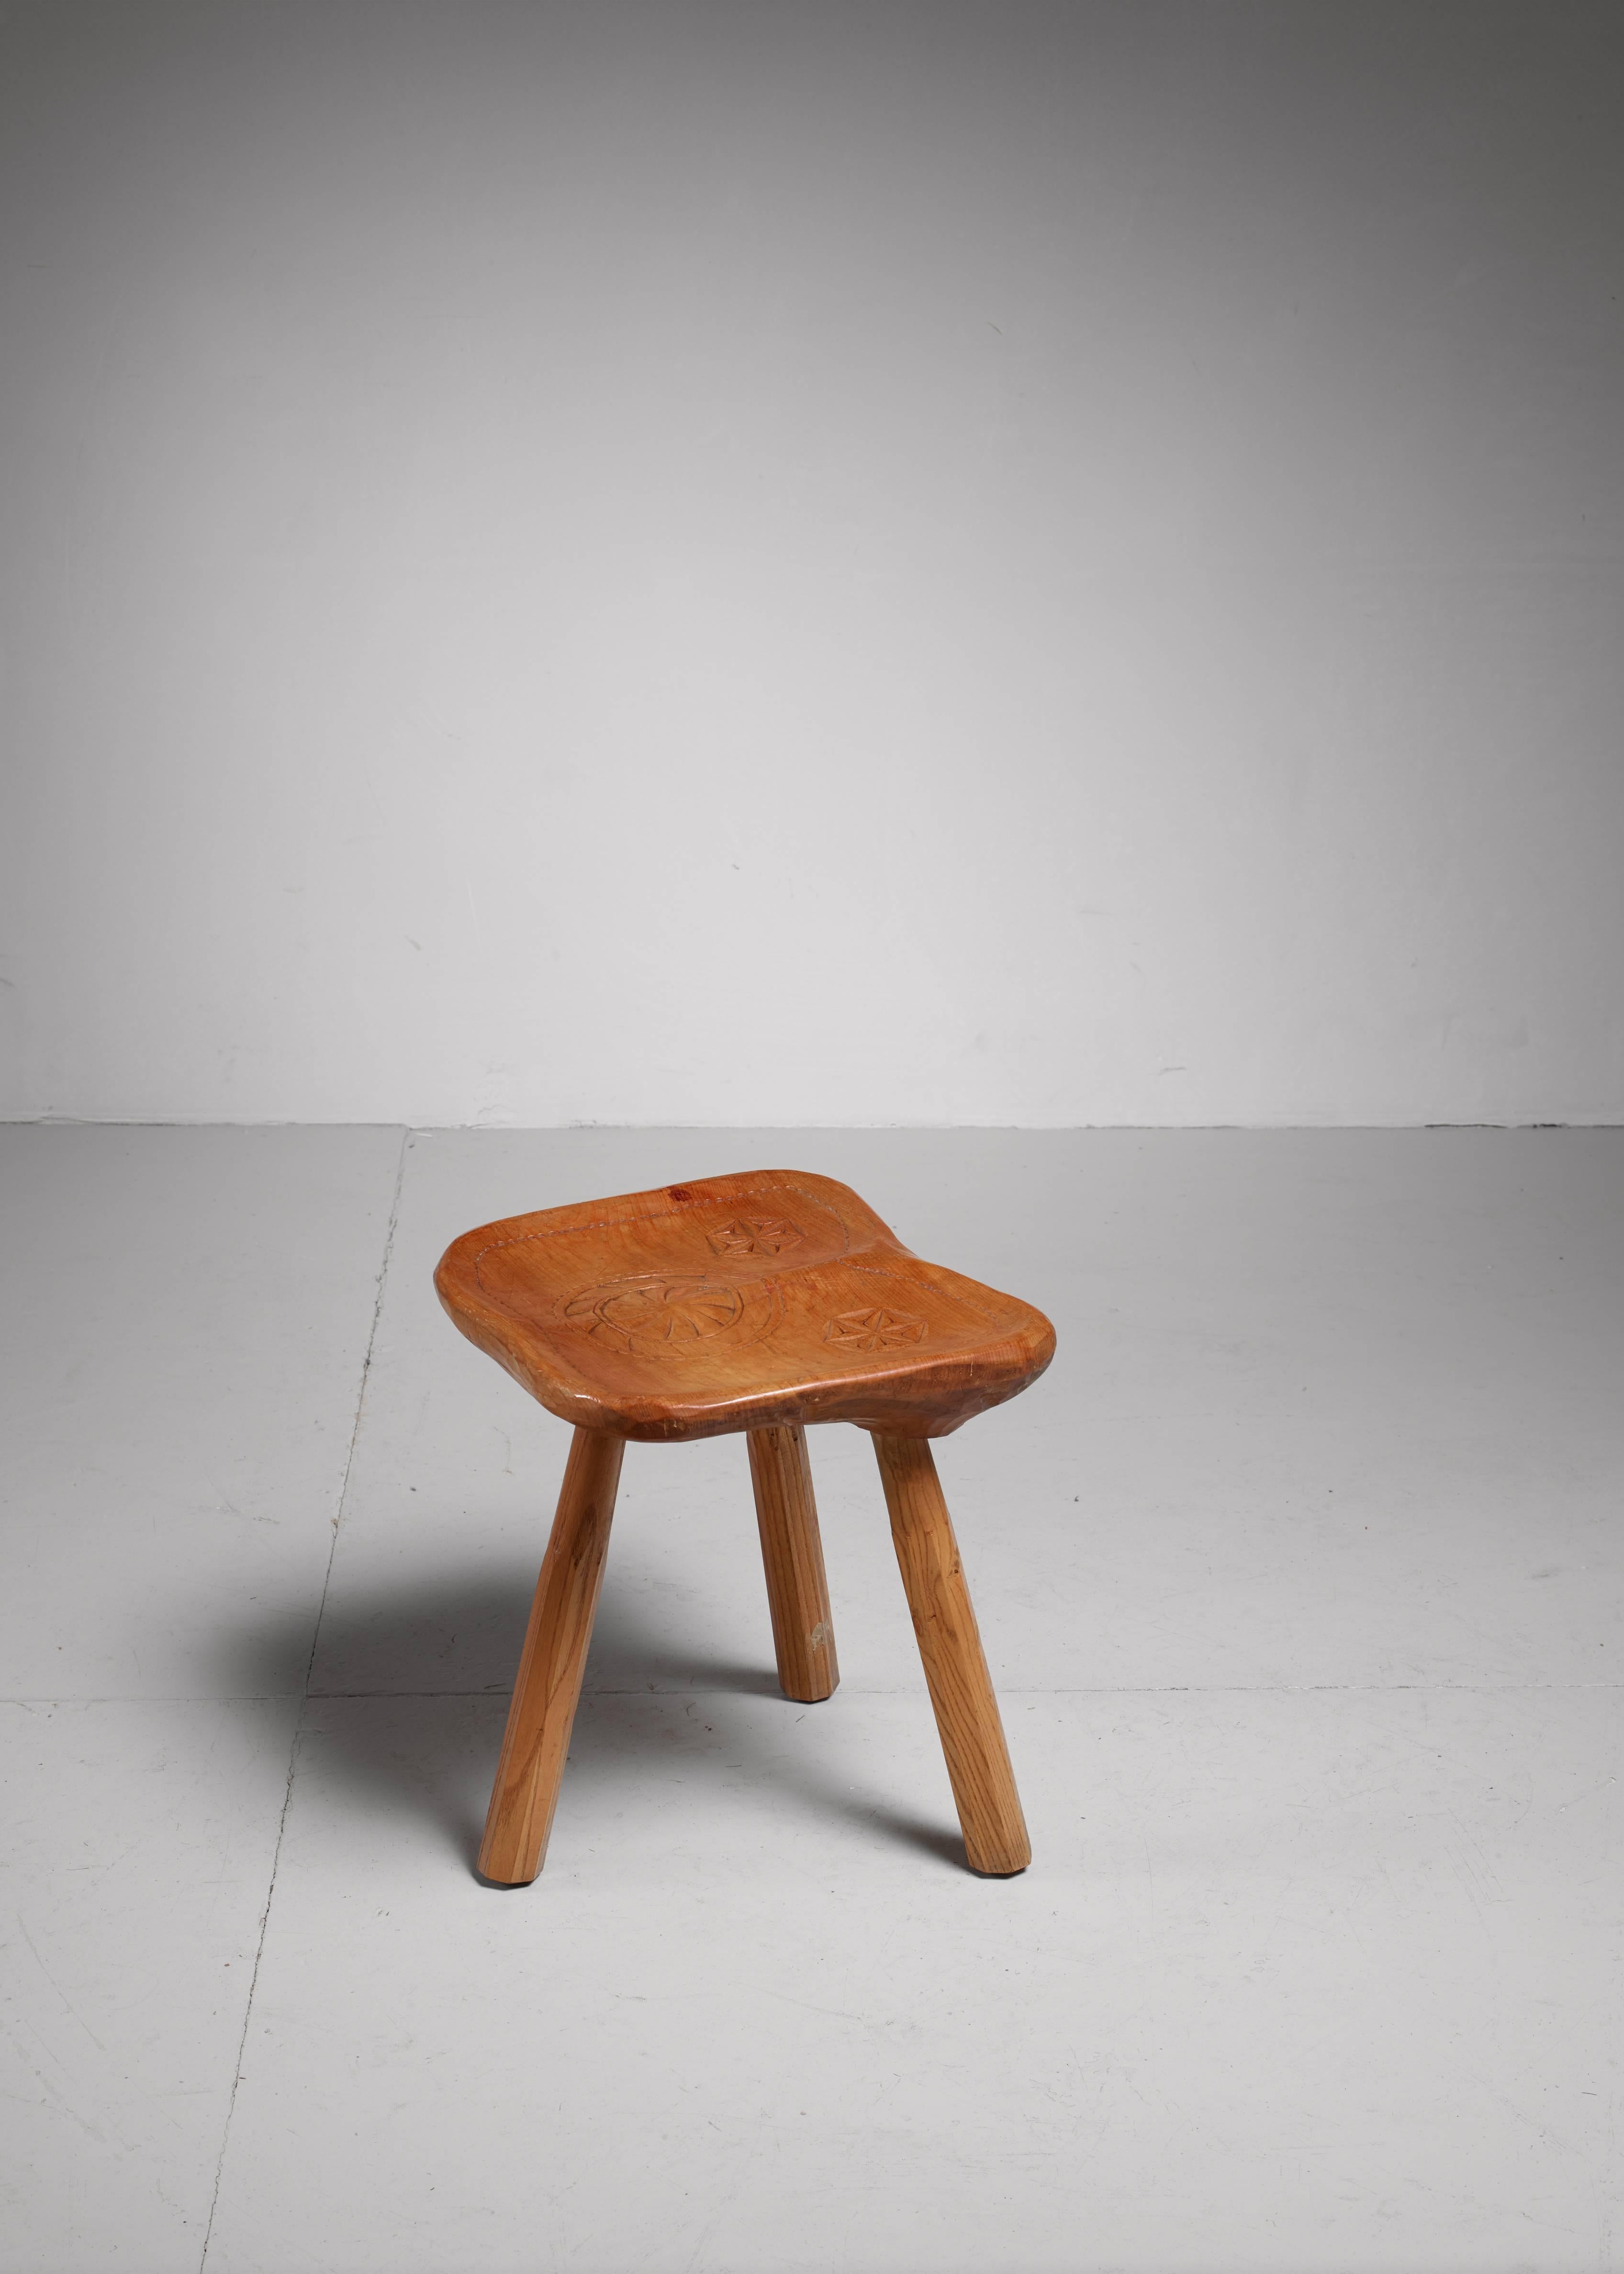 This stool is made and signed by Franco Armand, 1966. He learned the craft of his father and followed in his father's footstep after his studies. This is one of his early works. The stool is all handmade and like all his furniture made from one